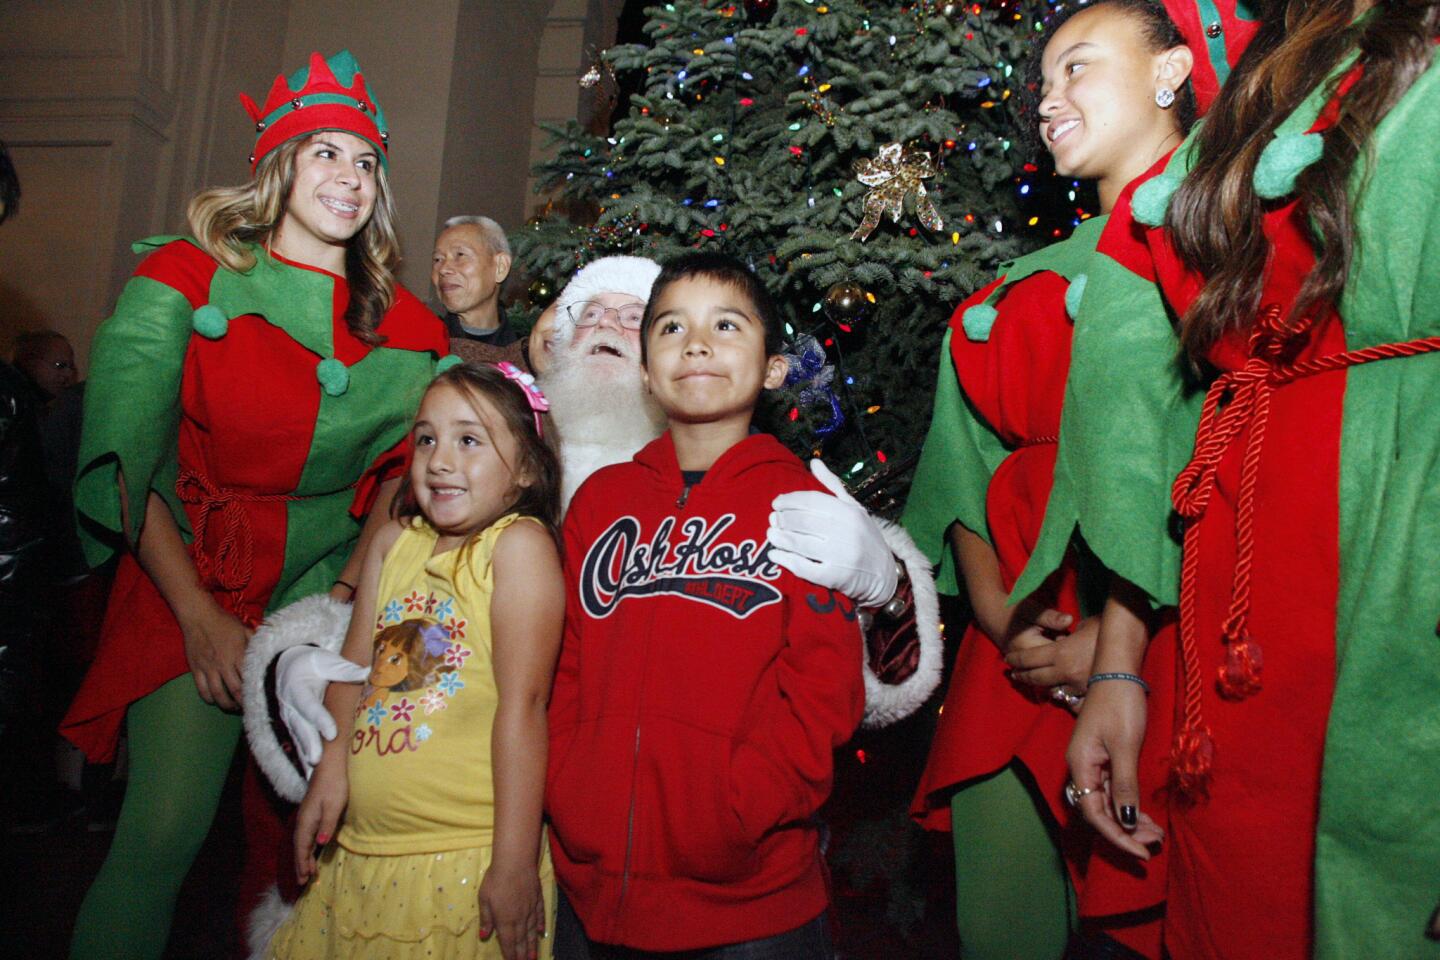 Linney Parra, 5 and Michael Cremona, 5, pose with Santa and his elves during a Christmas tree lighting which took place at Pasadena City Hall on Thursday, December 6, 2012.